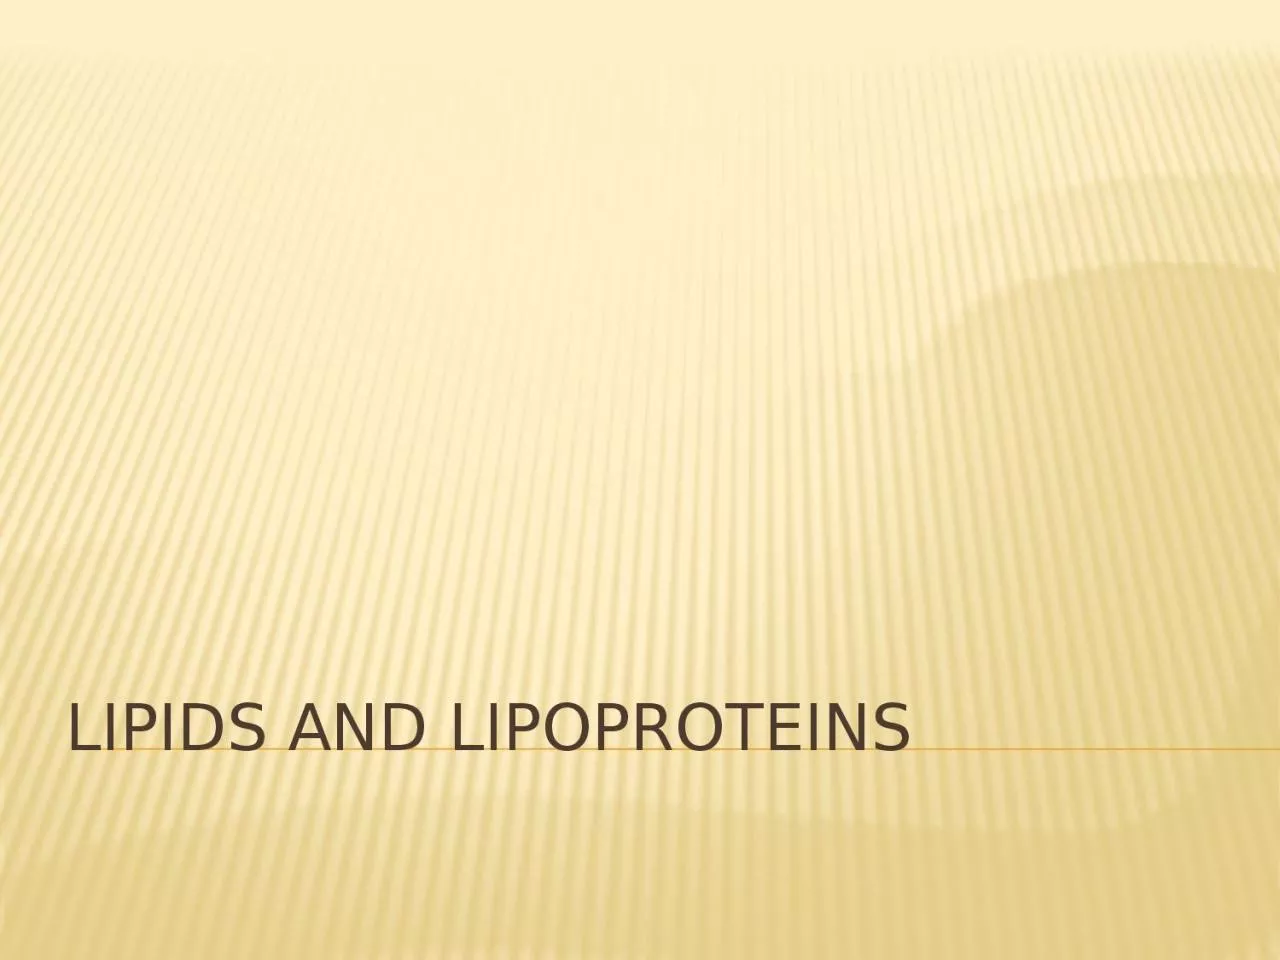 Lipids and lipoproteins Lipid chemistry and cardiovascular profile